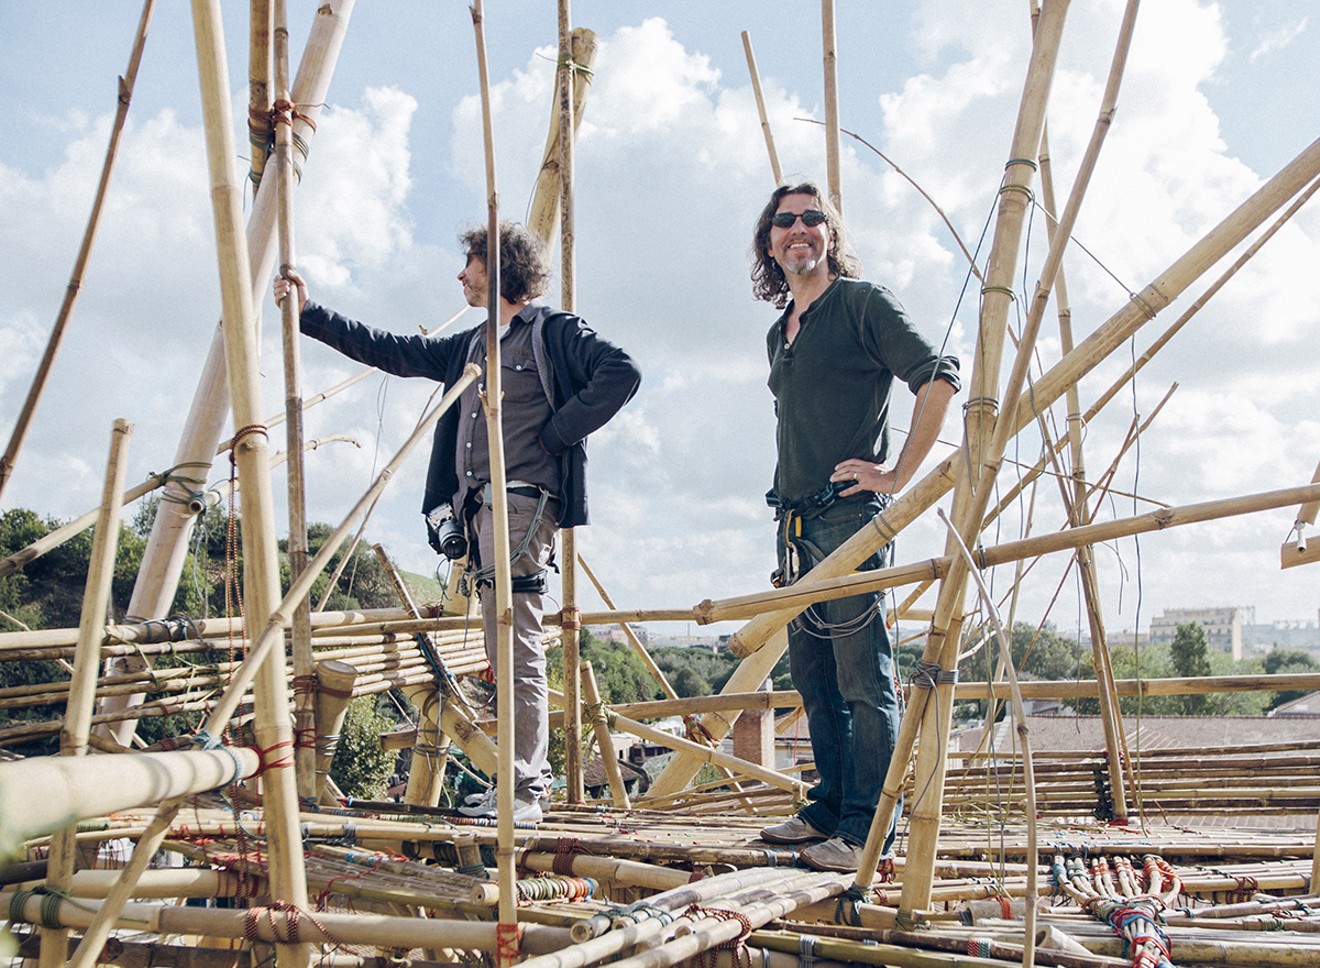 Preview  MFAH Becomes Next Chapter of Big Bambú With This Thing